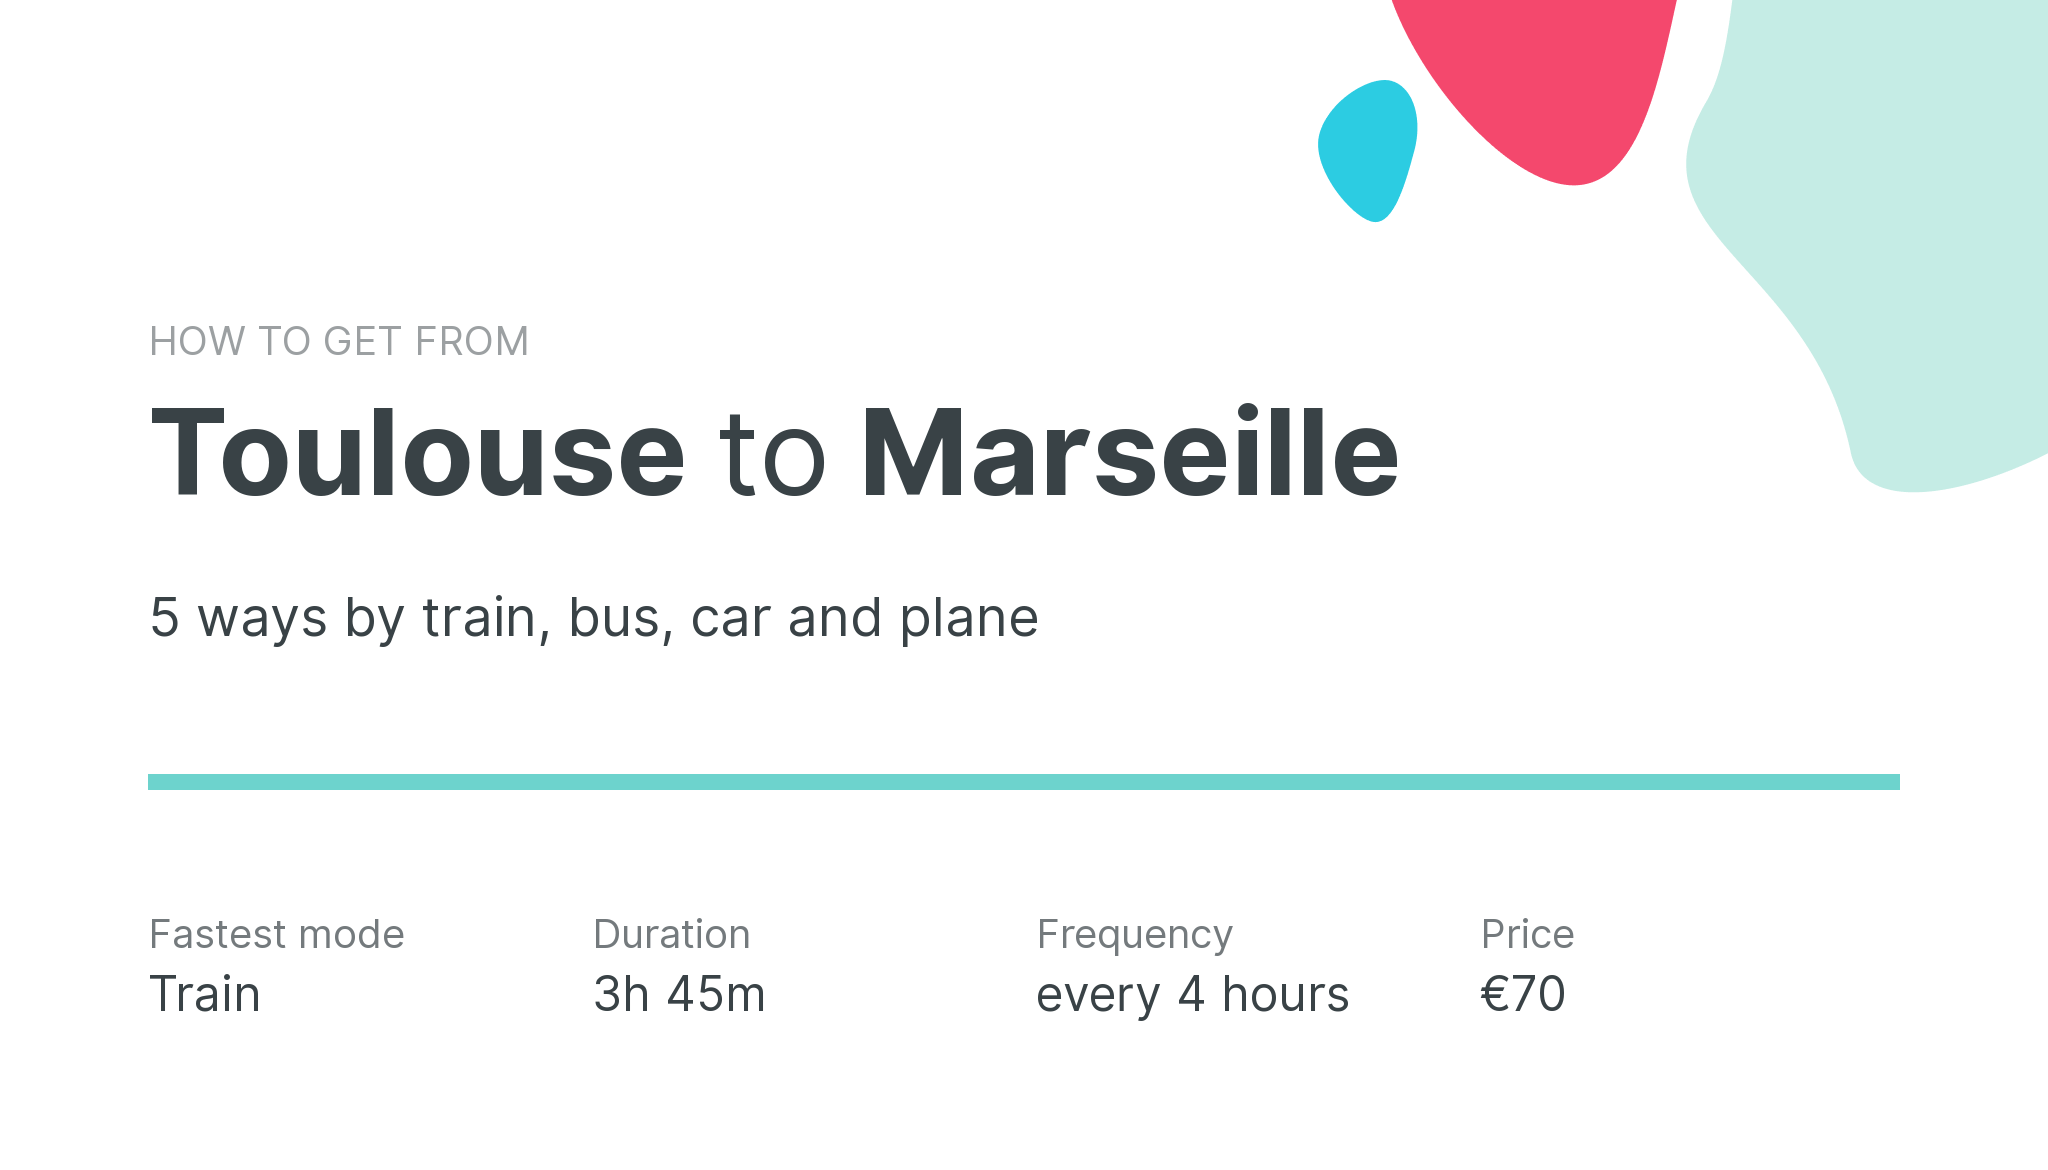 How do I get from Toulouse to Marseille